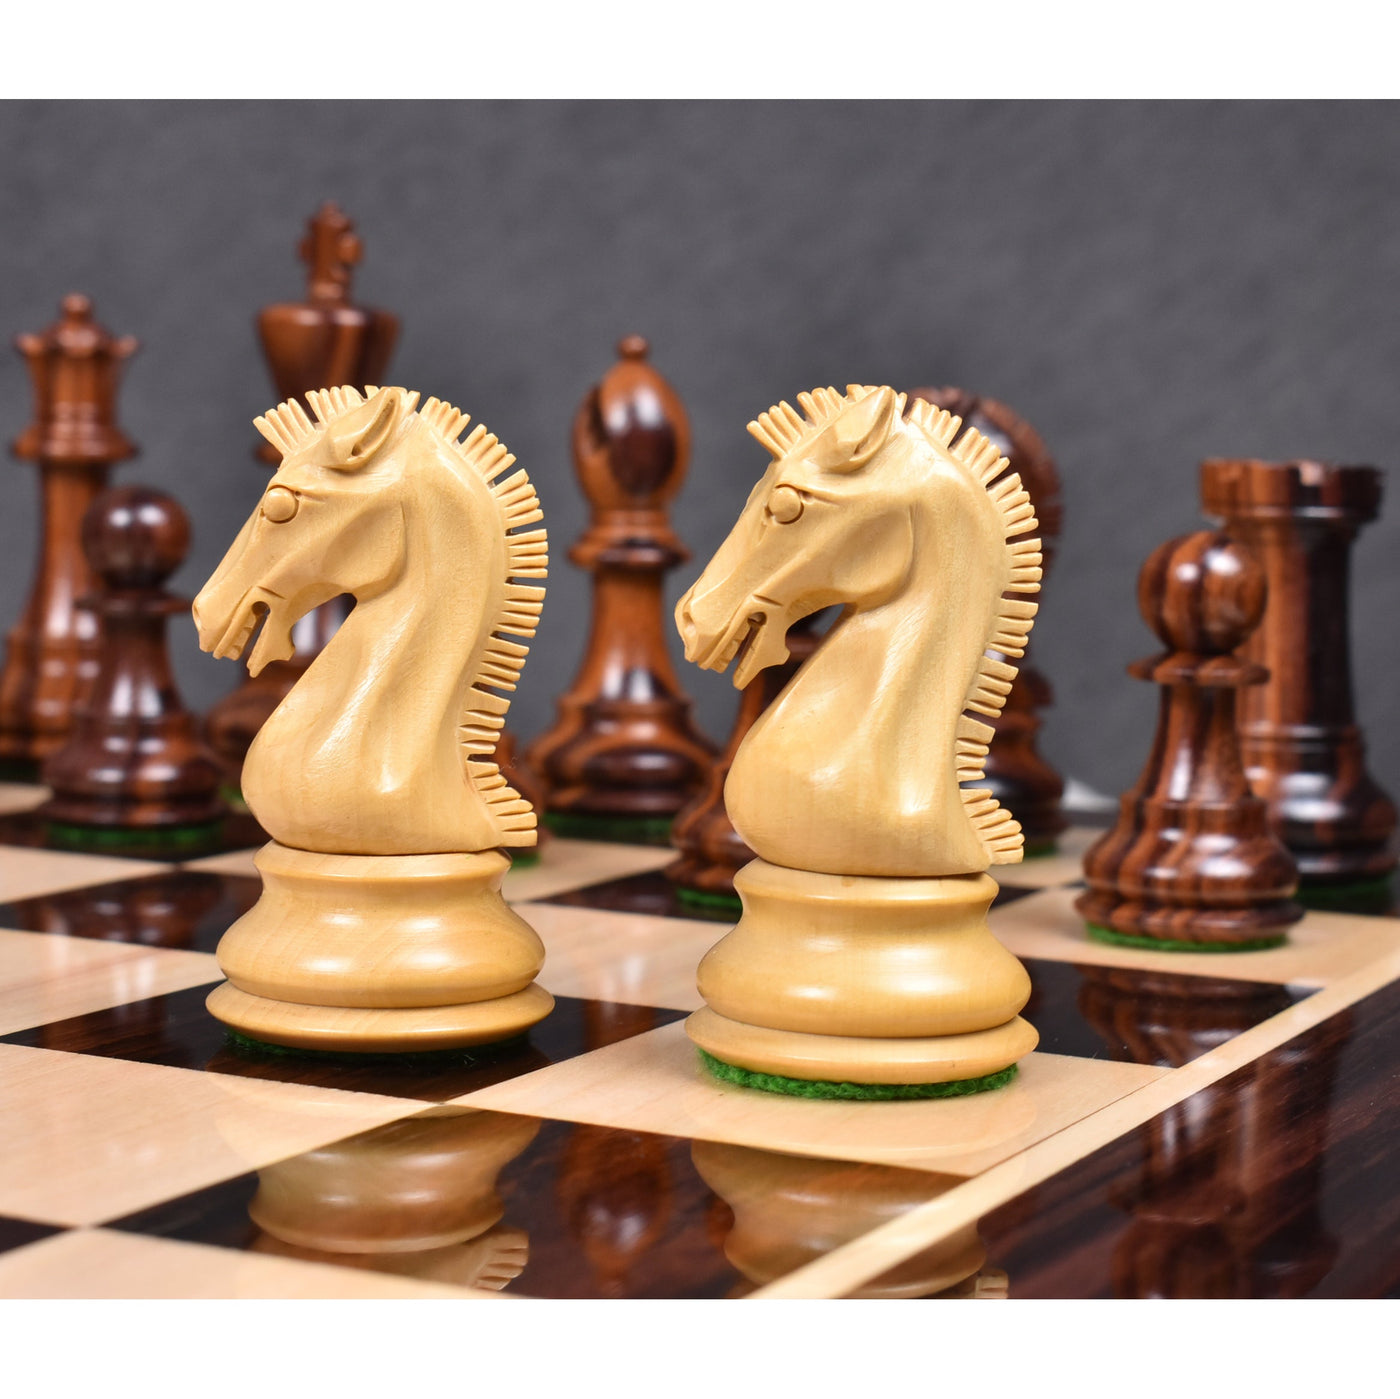 Slightly Imperfect 3.9" Craftsman Knight Staunton Chess Set - Chess Pieces Only -  Triple weighted Rosewood